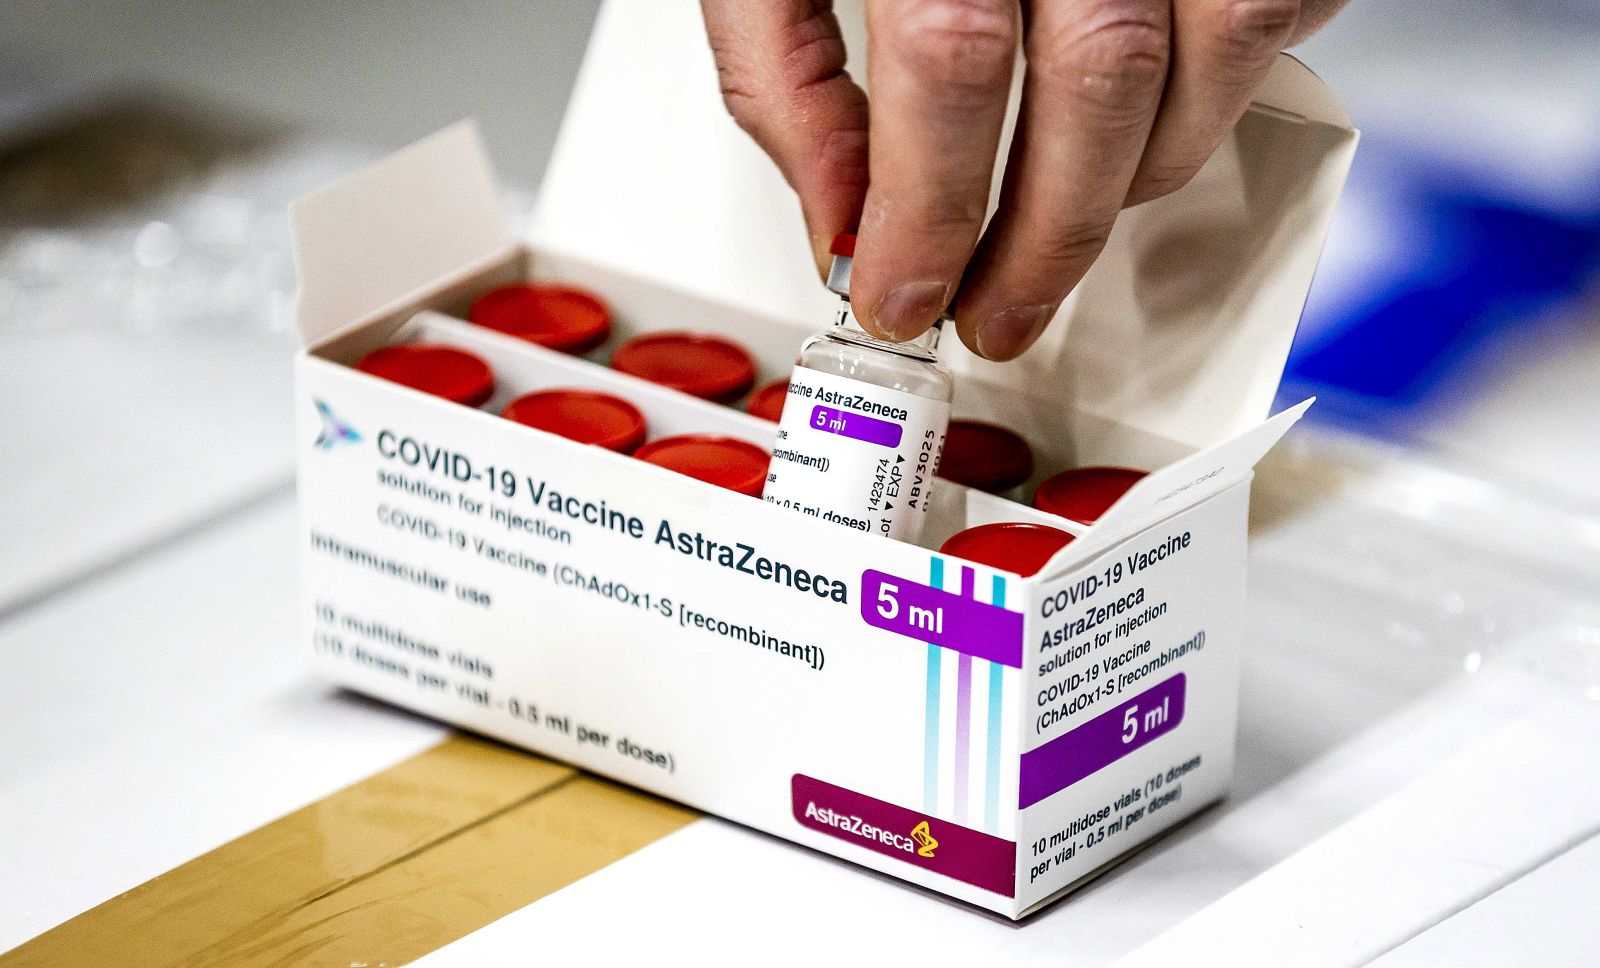 epa09074881 (FILE) - A vial of AstraZeneca's Covid-19 vaccine stored in Movianto in Oss, The Netherlands, 12 February 2021 (reissued 14 March 2021). The Dutch health ministry on 14 March 2021 said it was suspending the AstraZeneca vaccine rollout, just days after pressing ahead with its use.  EPA/Remko de Waal